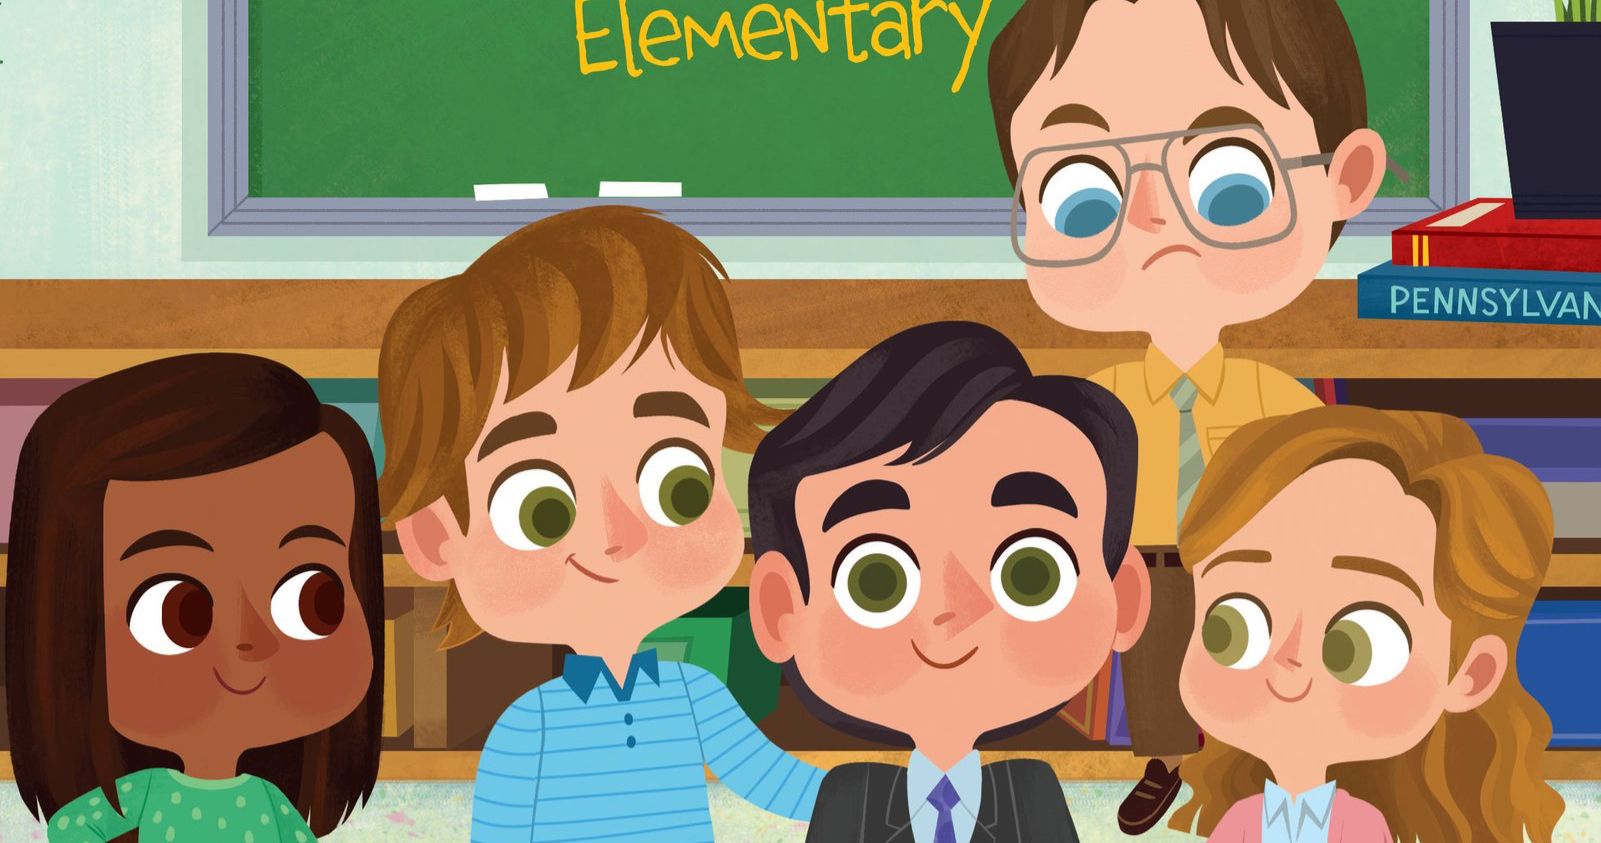 The Office Kids Book Brings Dunder Mifflin to Elementary School